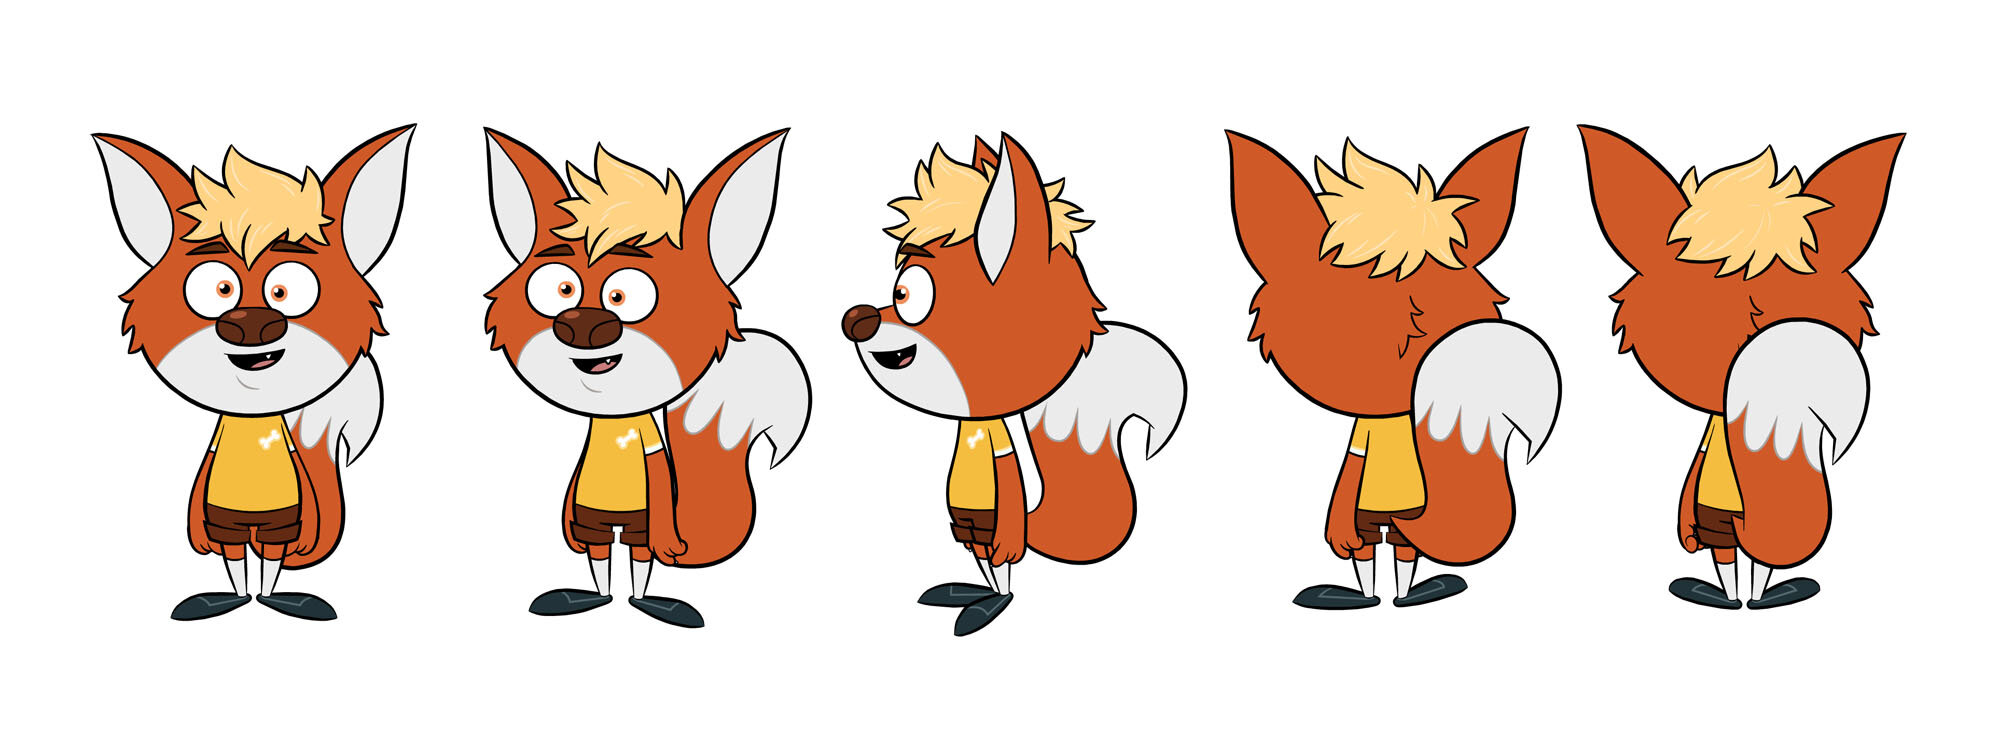 Character Turnarounds - Flop